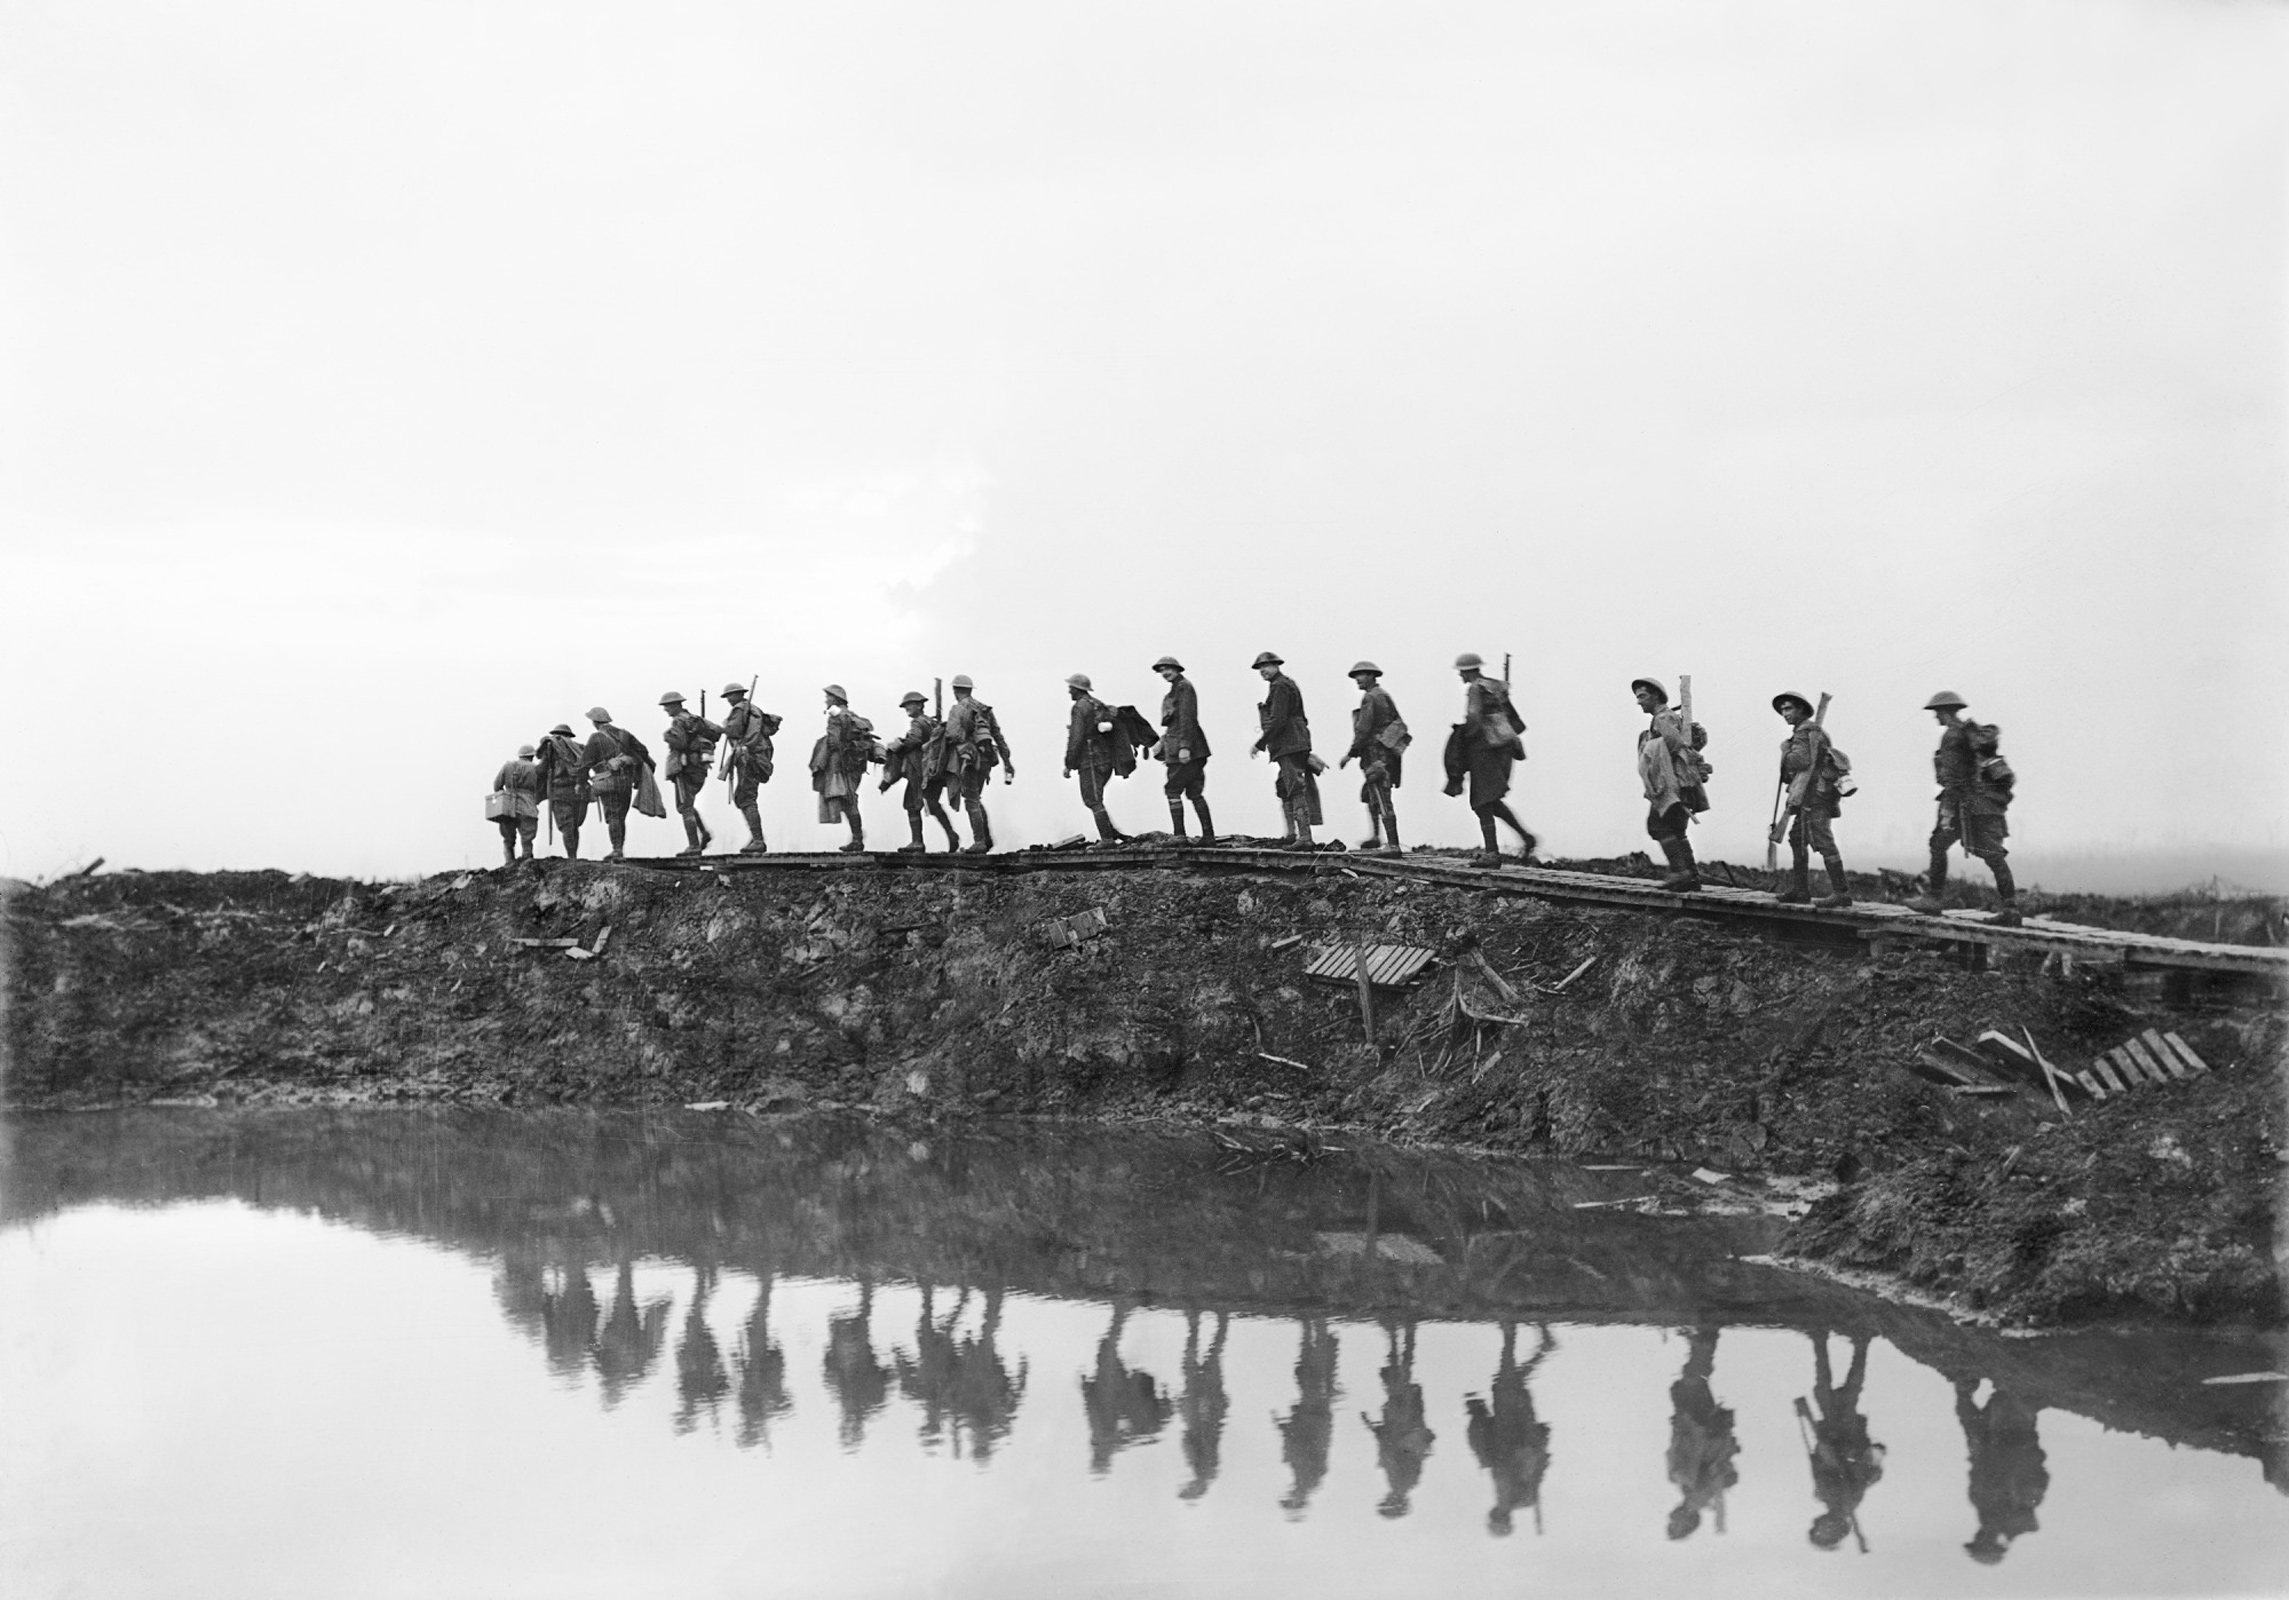 Supporting troops of the 1st Australian Division walking on a duckboard track near Hooge, in the Ypres Sector, Belgium, 1917